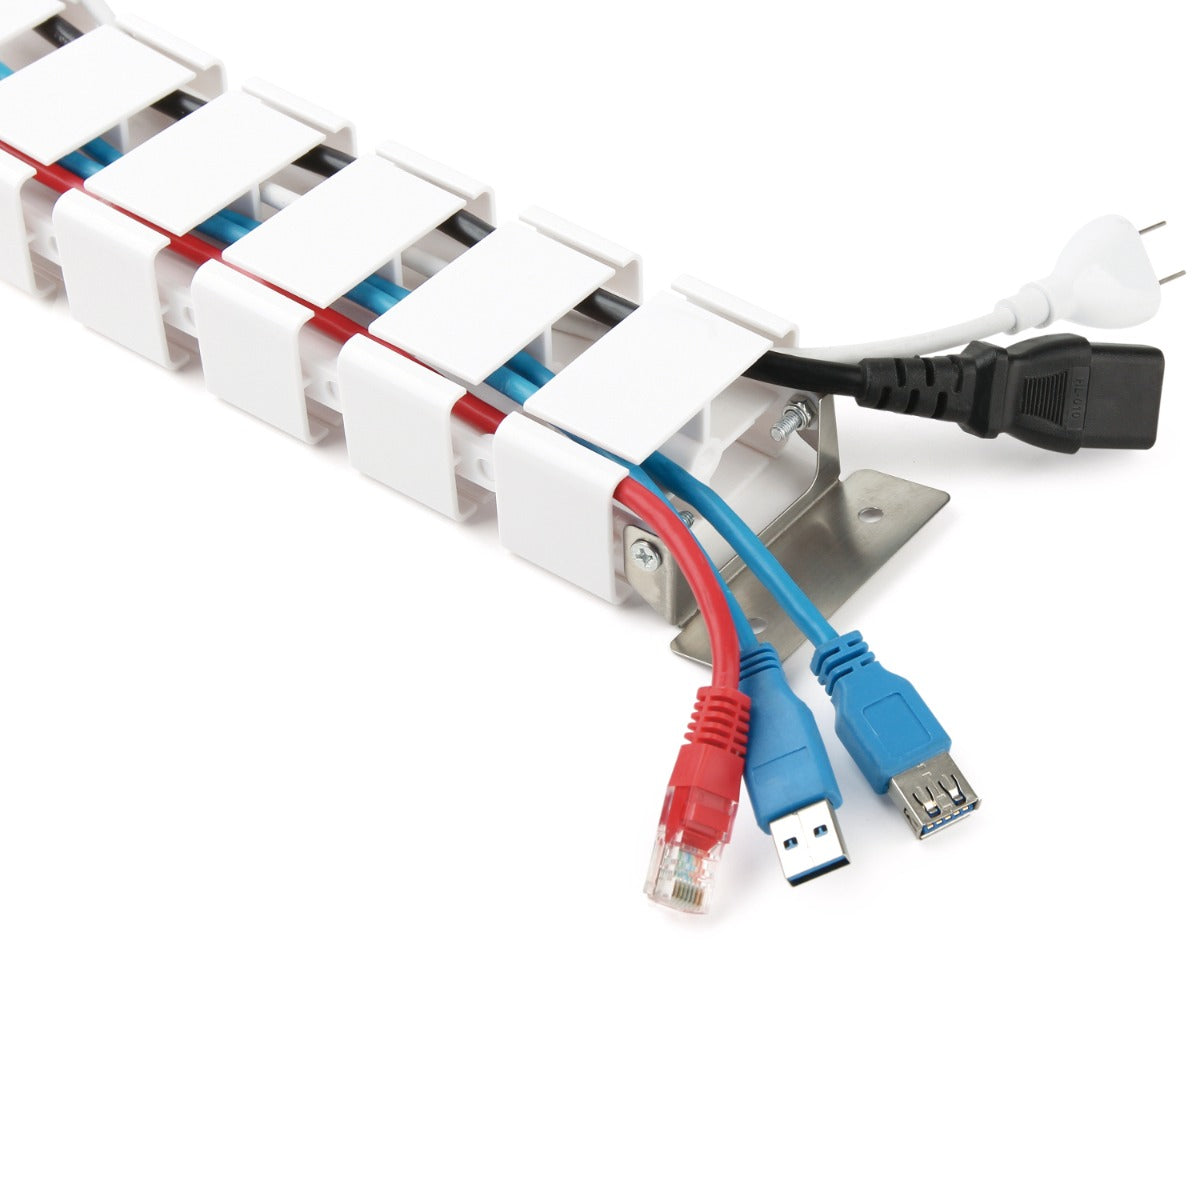 Single User Under-Desk Interlink Power Access and Cable Management